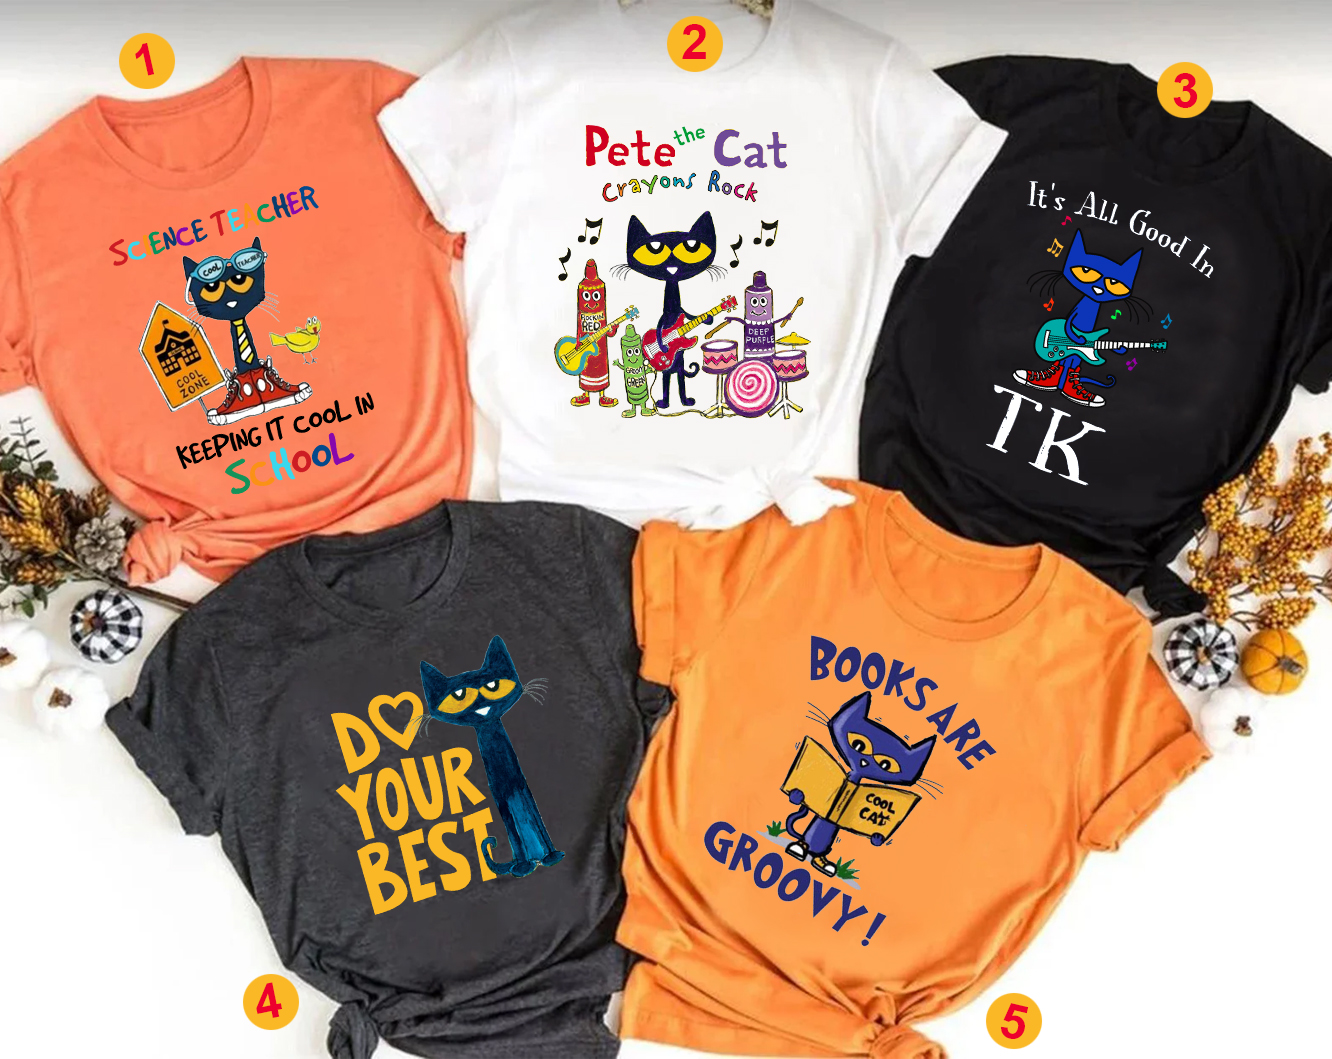 Custom Pete The Cat shirt, Do Your Best Shirt, Its All Good, Pete The Cat Teacher Life Back To School Shirt, Book Are Groovy Tee